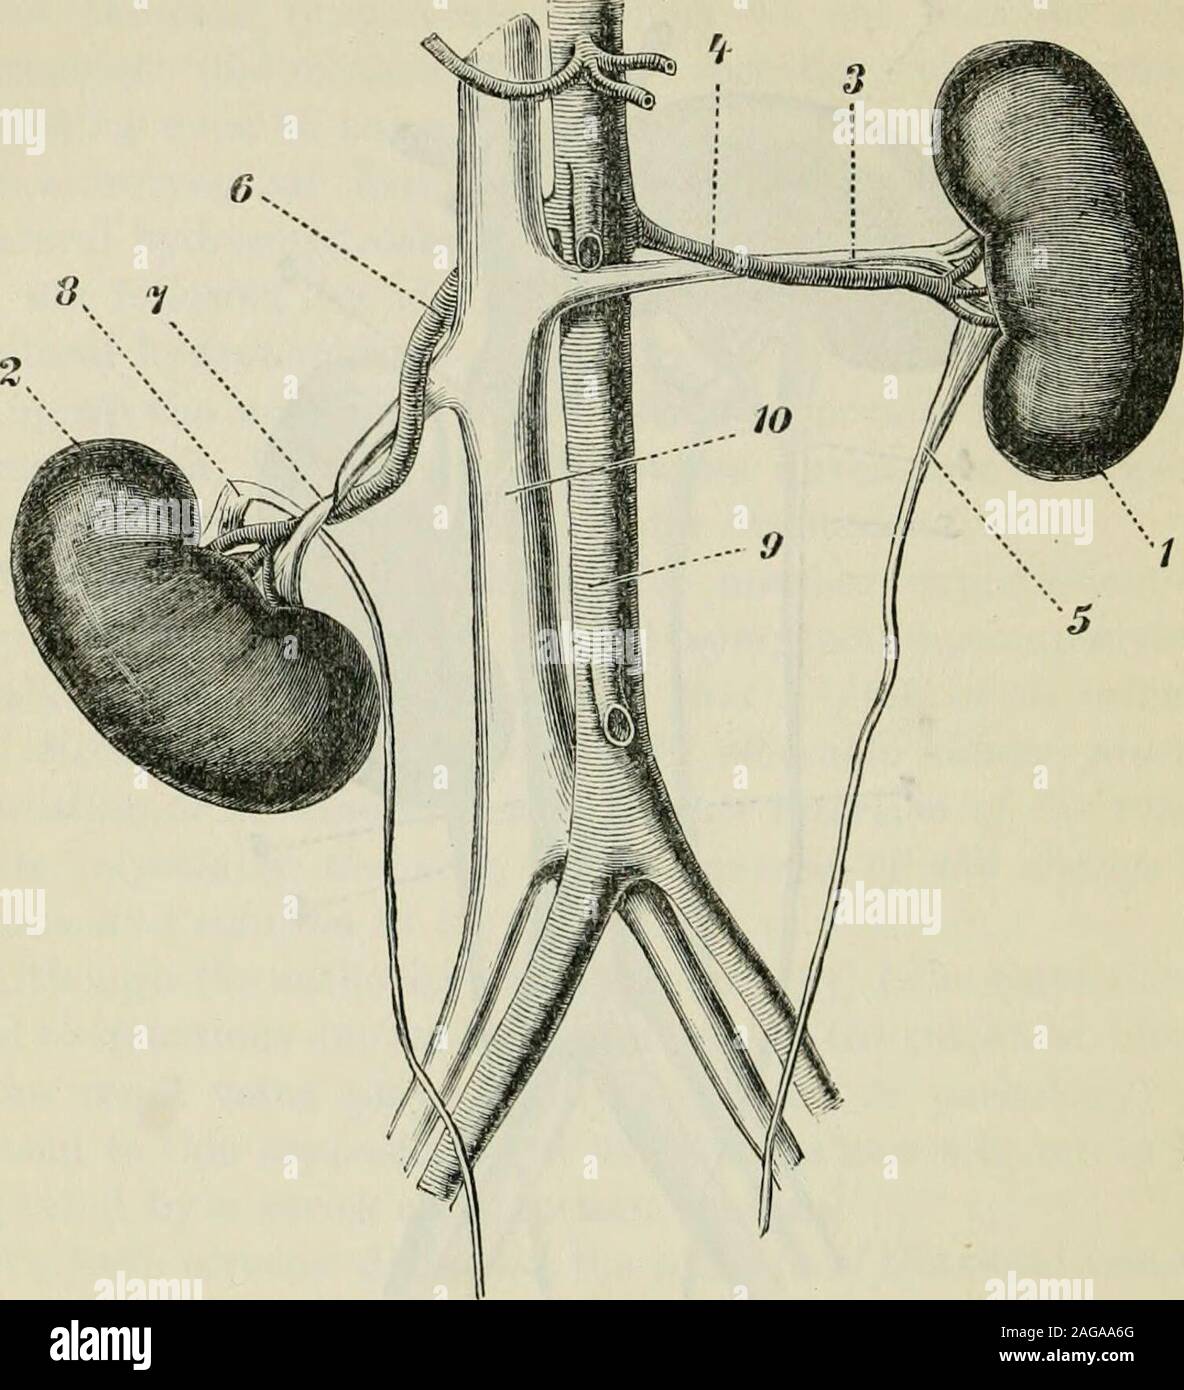 . Selected monographs. 1. Left l«clney. 2. Itight kidiifjy. 3. Lett renal veiu kiuked and twisted. 4. Right reniil vein compressed. 5. Ureter. 6. Abdominal aorta. 7. Vena cava inferior. There are, perhaps^ few patliological processes whicli havebeen so accurately investigated as the coarser disturbancesof circulation in the renal vein. Max Hermann and Ludioig(114) found that after tying the renal vein the tubuli uriniferibecame completely closed in consequence of the obstructionto the return of the blood, so that the secretion of urineceased. If the renal vein became pervious again, the secre- Stock Photo